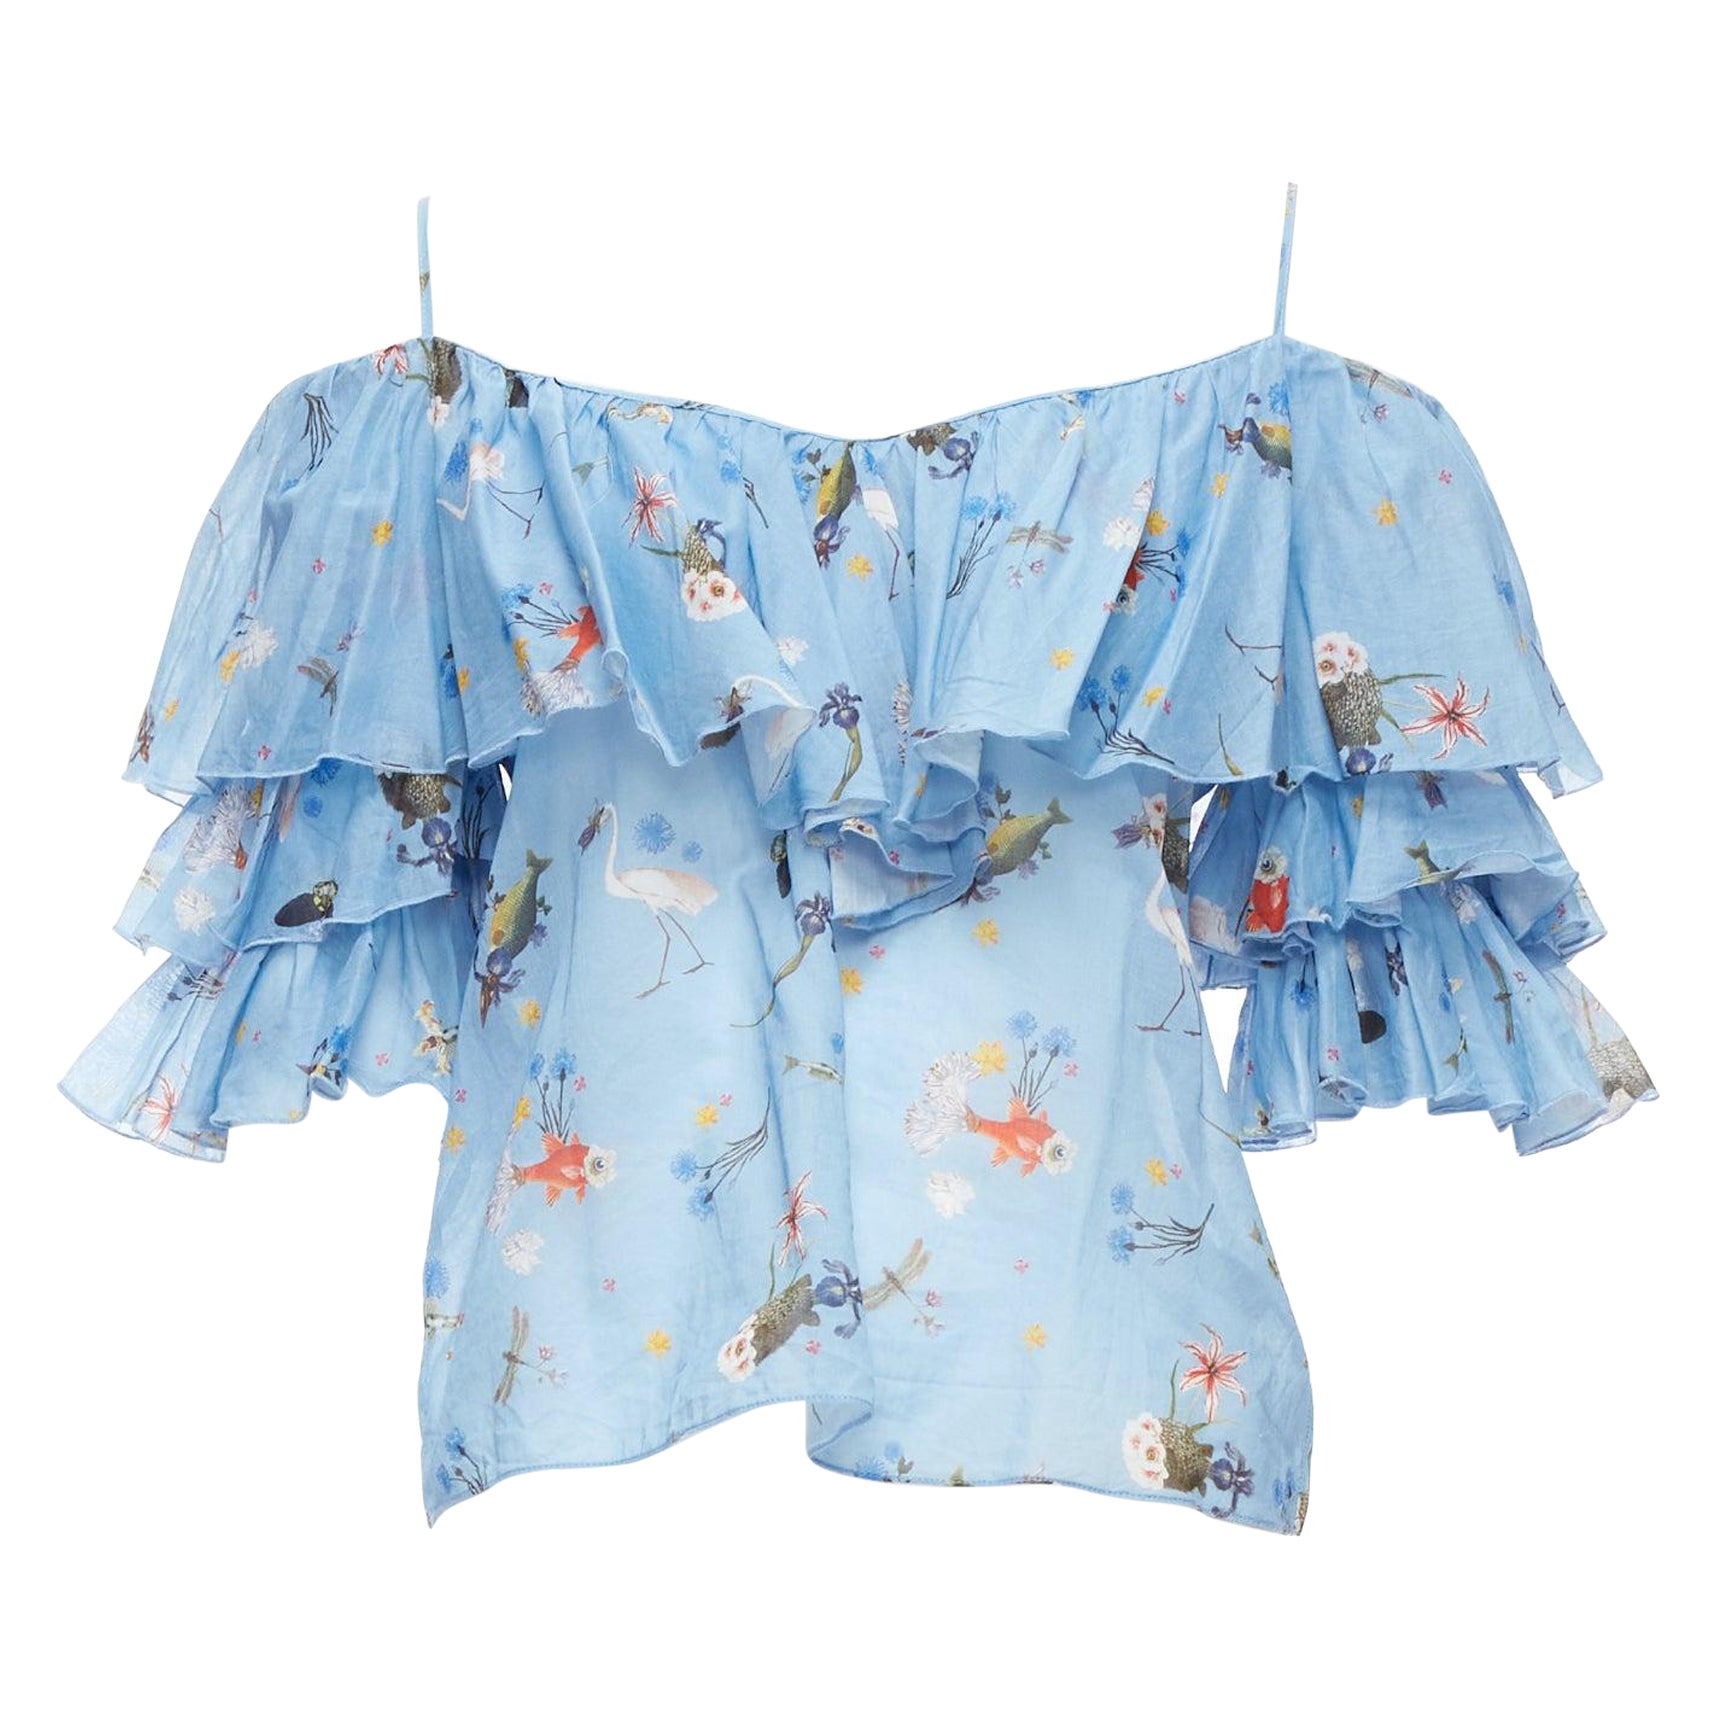 VIVETTA blue cotton animal floral print tiered bell sleeves strappy top IT40 S For Sale